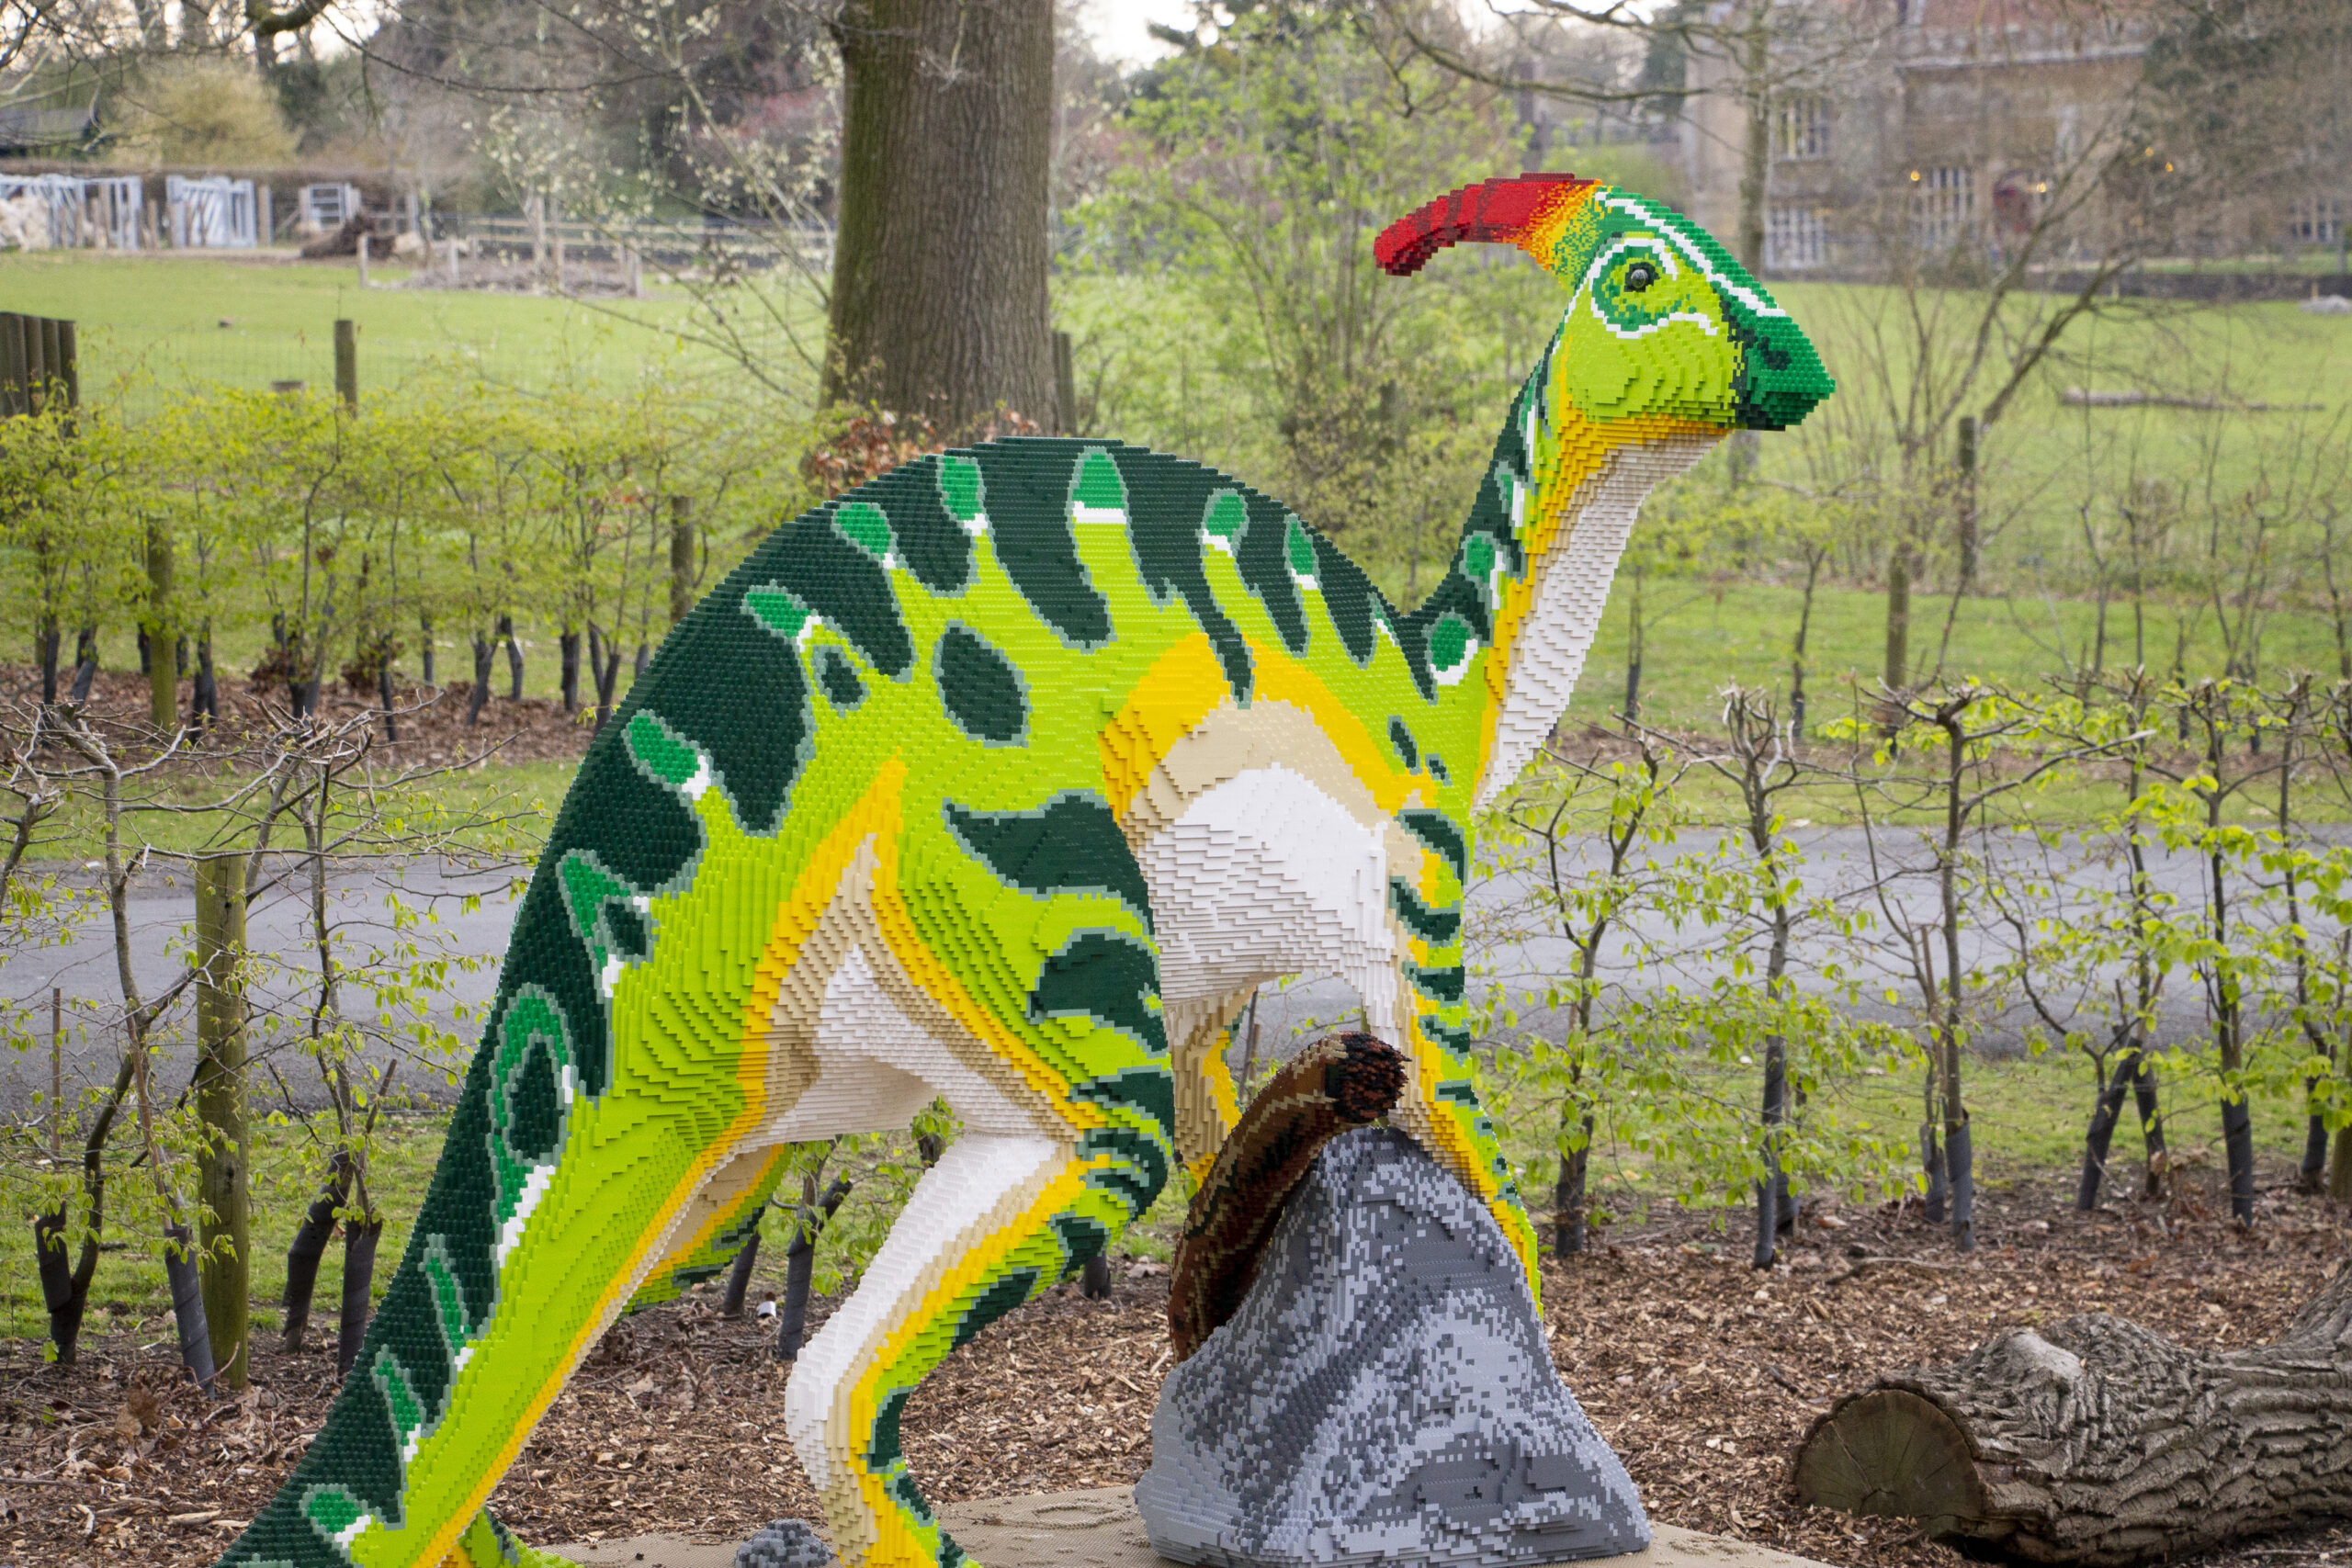 Southport will become DinoTown with a series of Bricklive Brickosaurs in an initiative by Southport BID. The Parasaur